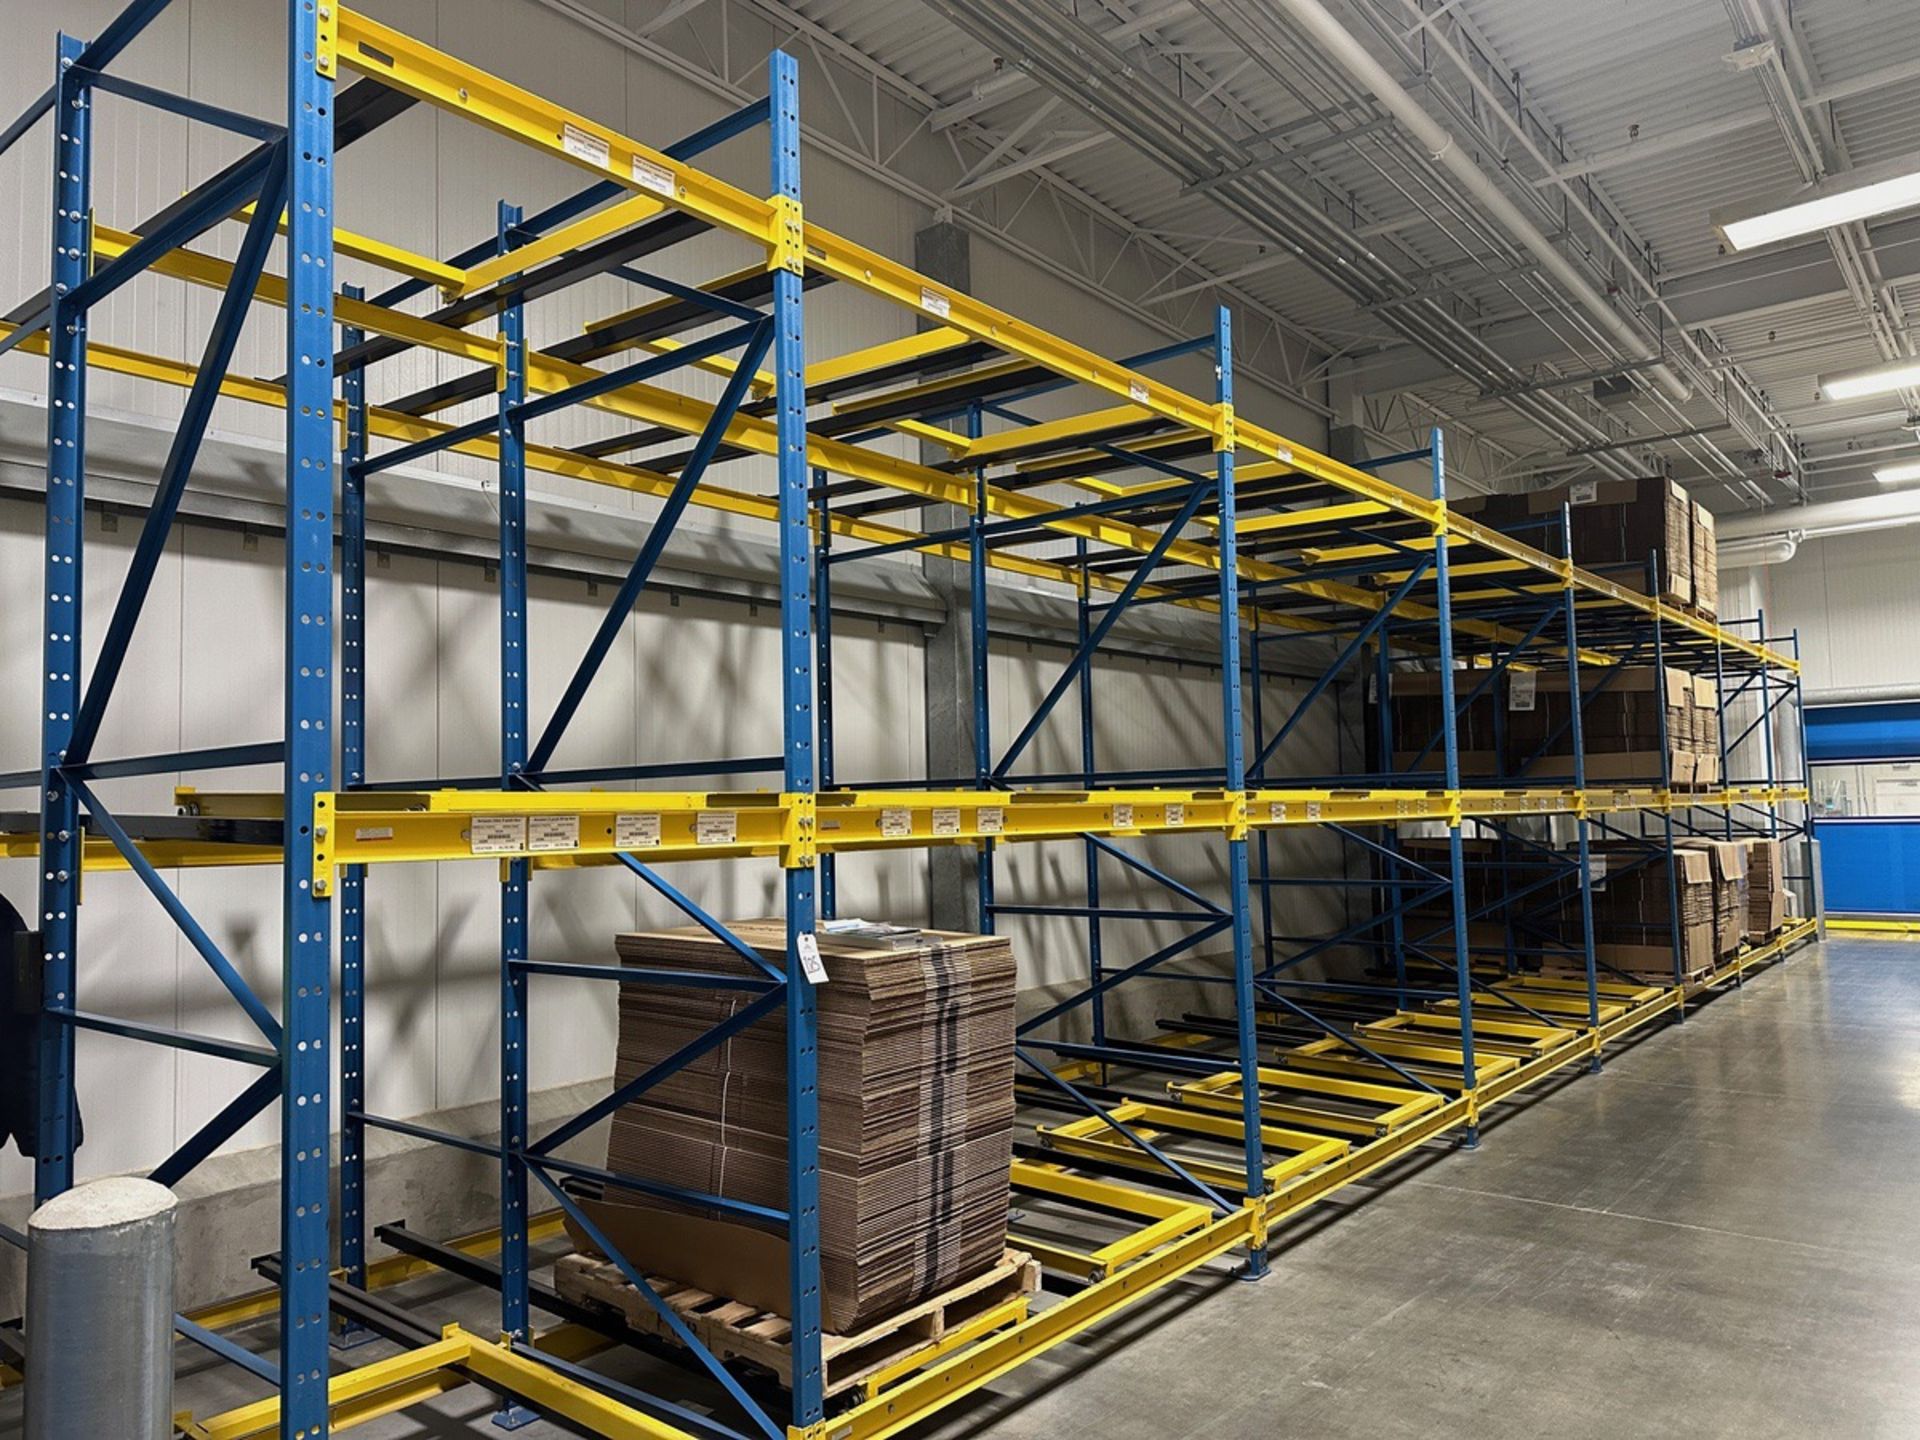 Lot of Gravity Fed Pallet Racking (2 Bays Deep) - (9) 12' x 8' Uprights - (63) 8' C | Rig Fee $2500